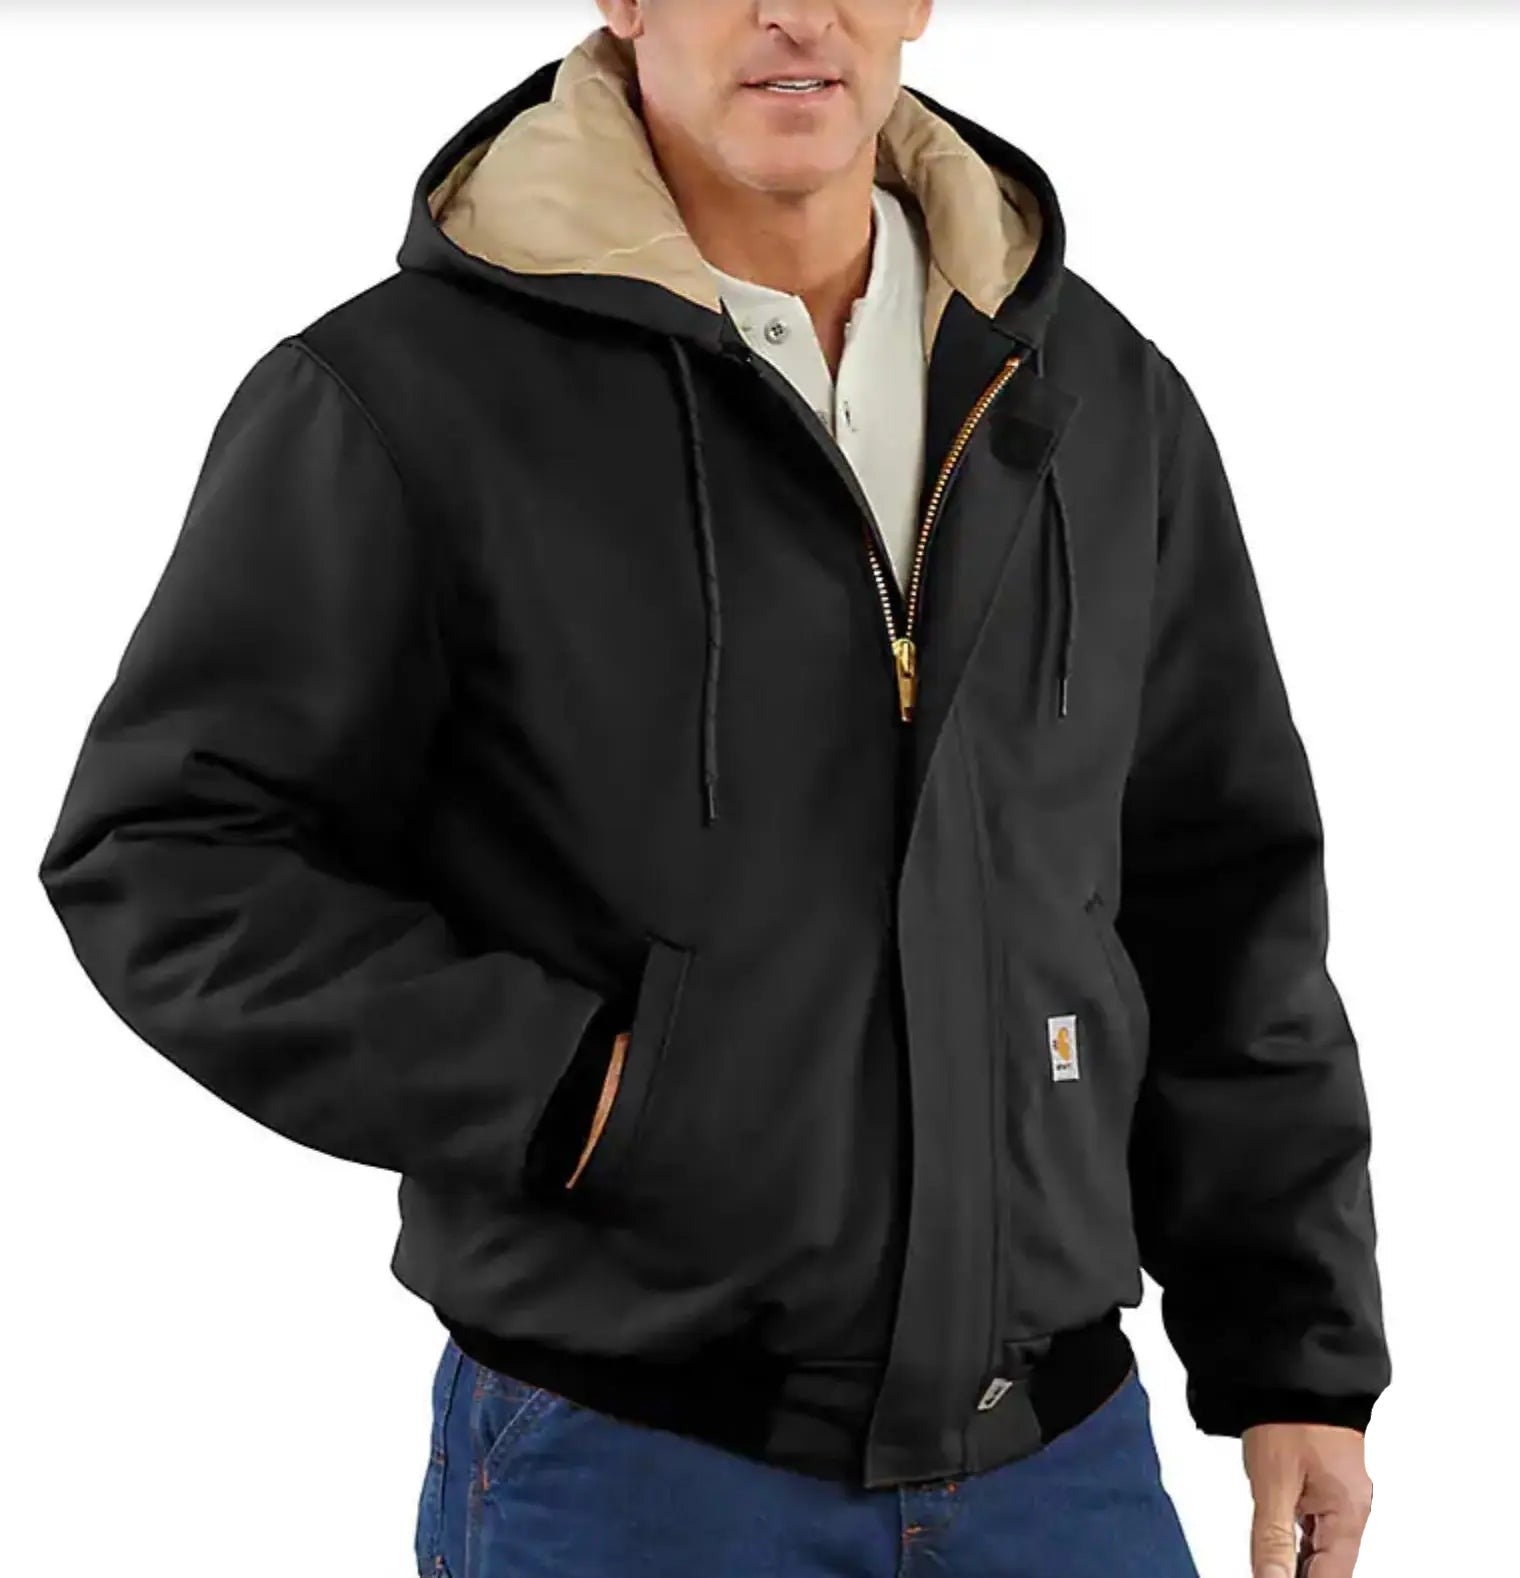 CARHARTT - Flame Resistant Loose Fit Duck Insulated Active Jac - Becker Safety and Supply